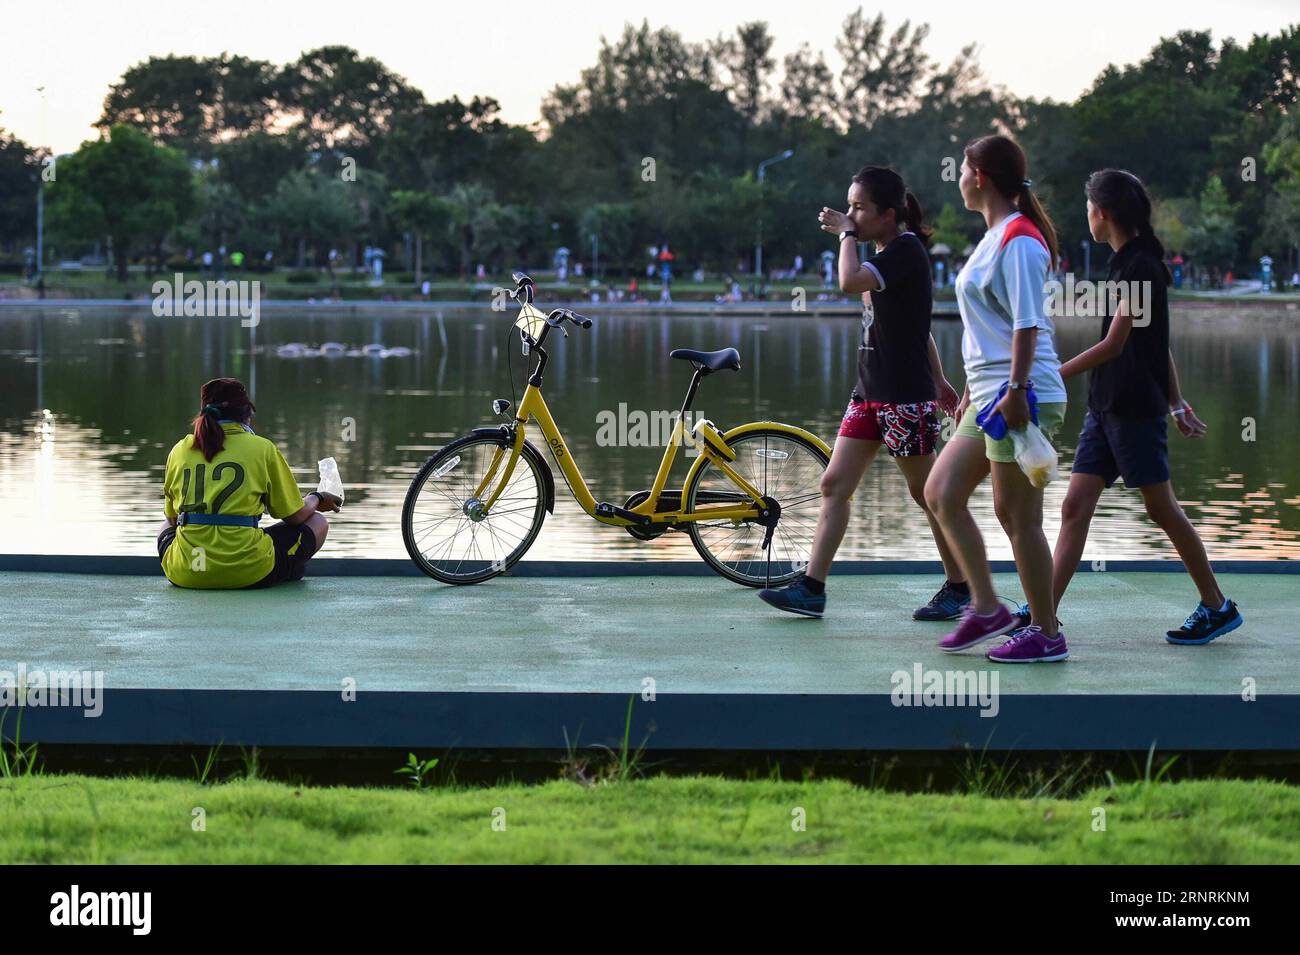 (171007) -- PHUKET, Oct. 7, 2017 -- People walk past an ofo sharing-bike at a public park in Phuket, Thailand, Oct. 5, 2017. China s dock-less bike-sharing company ofo provided more than 1,000 bikes in Phuket s key locations in late September and offered a 1-month free trial without deposit fee. Now the bike-sharing service has benefited local residents and tourists. Ofo s regular service fee will be charged at 5 Baht per 30 minutes usage, with a deposit fee of 99 Baht. )(zhf) THAILAND-PHUKET-CHINA-BIKE-SHARING-OFO LixMangmang PUBLICATIONxNOTxINxCHN Stock Photo